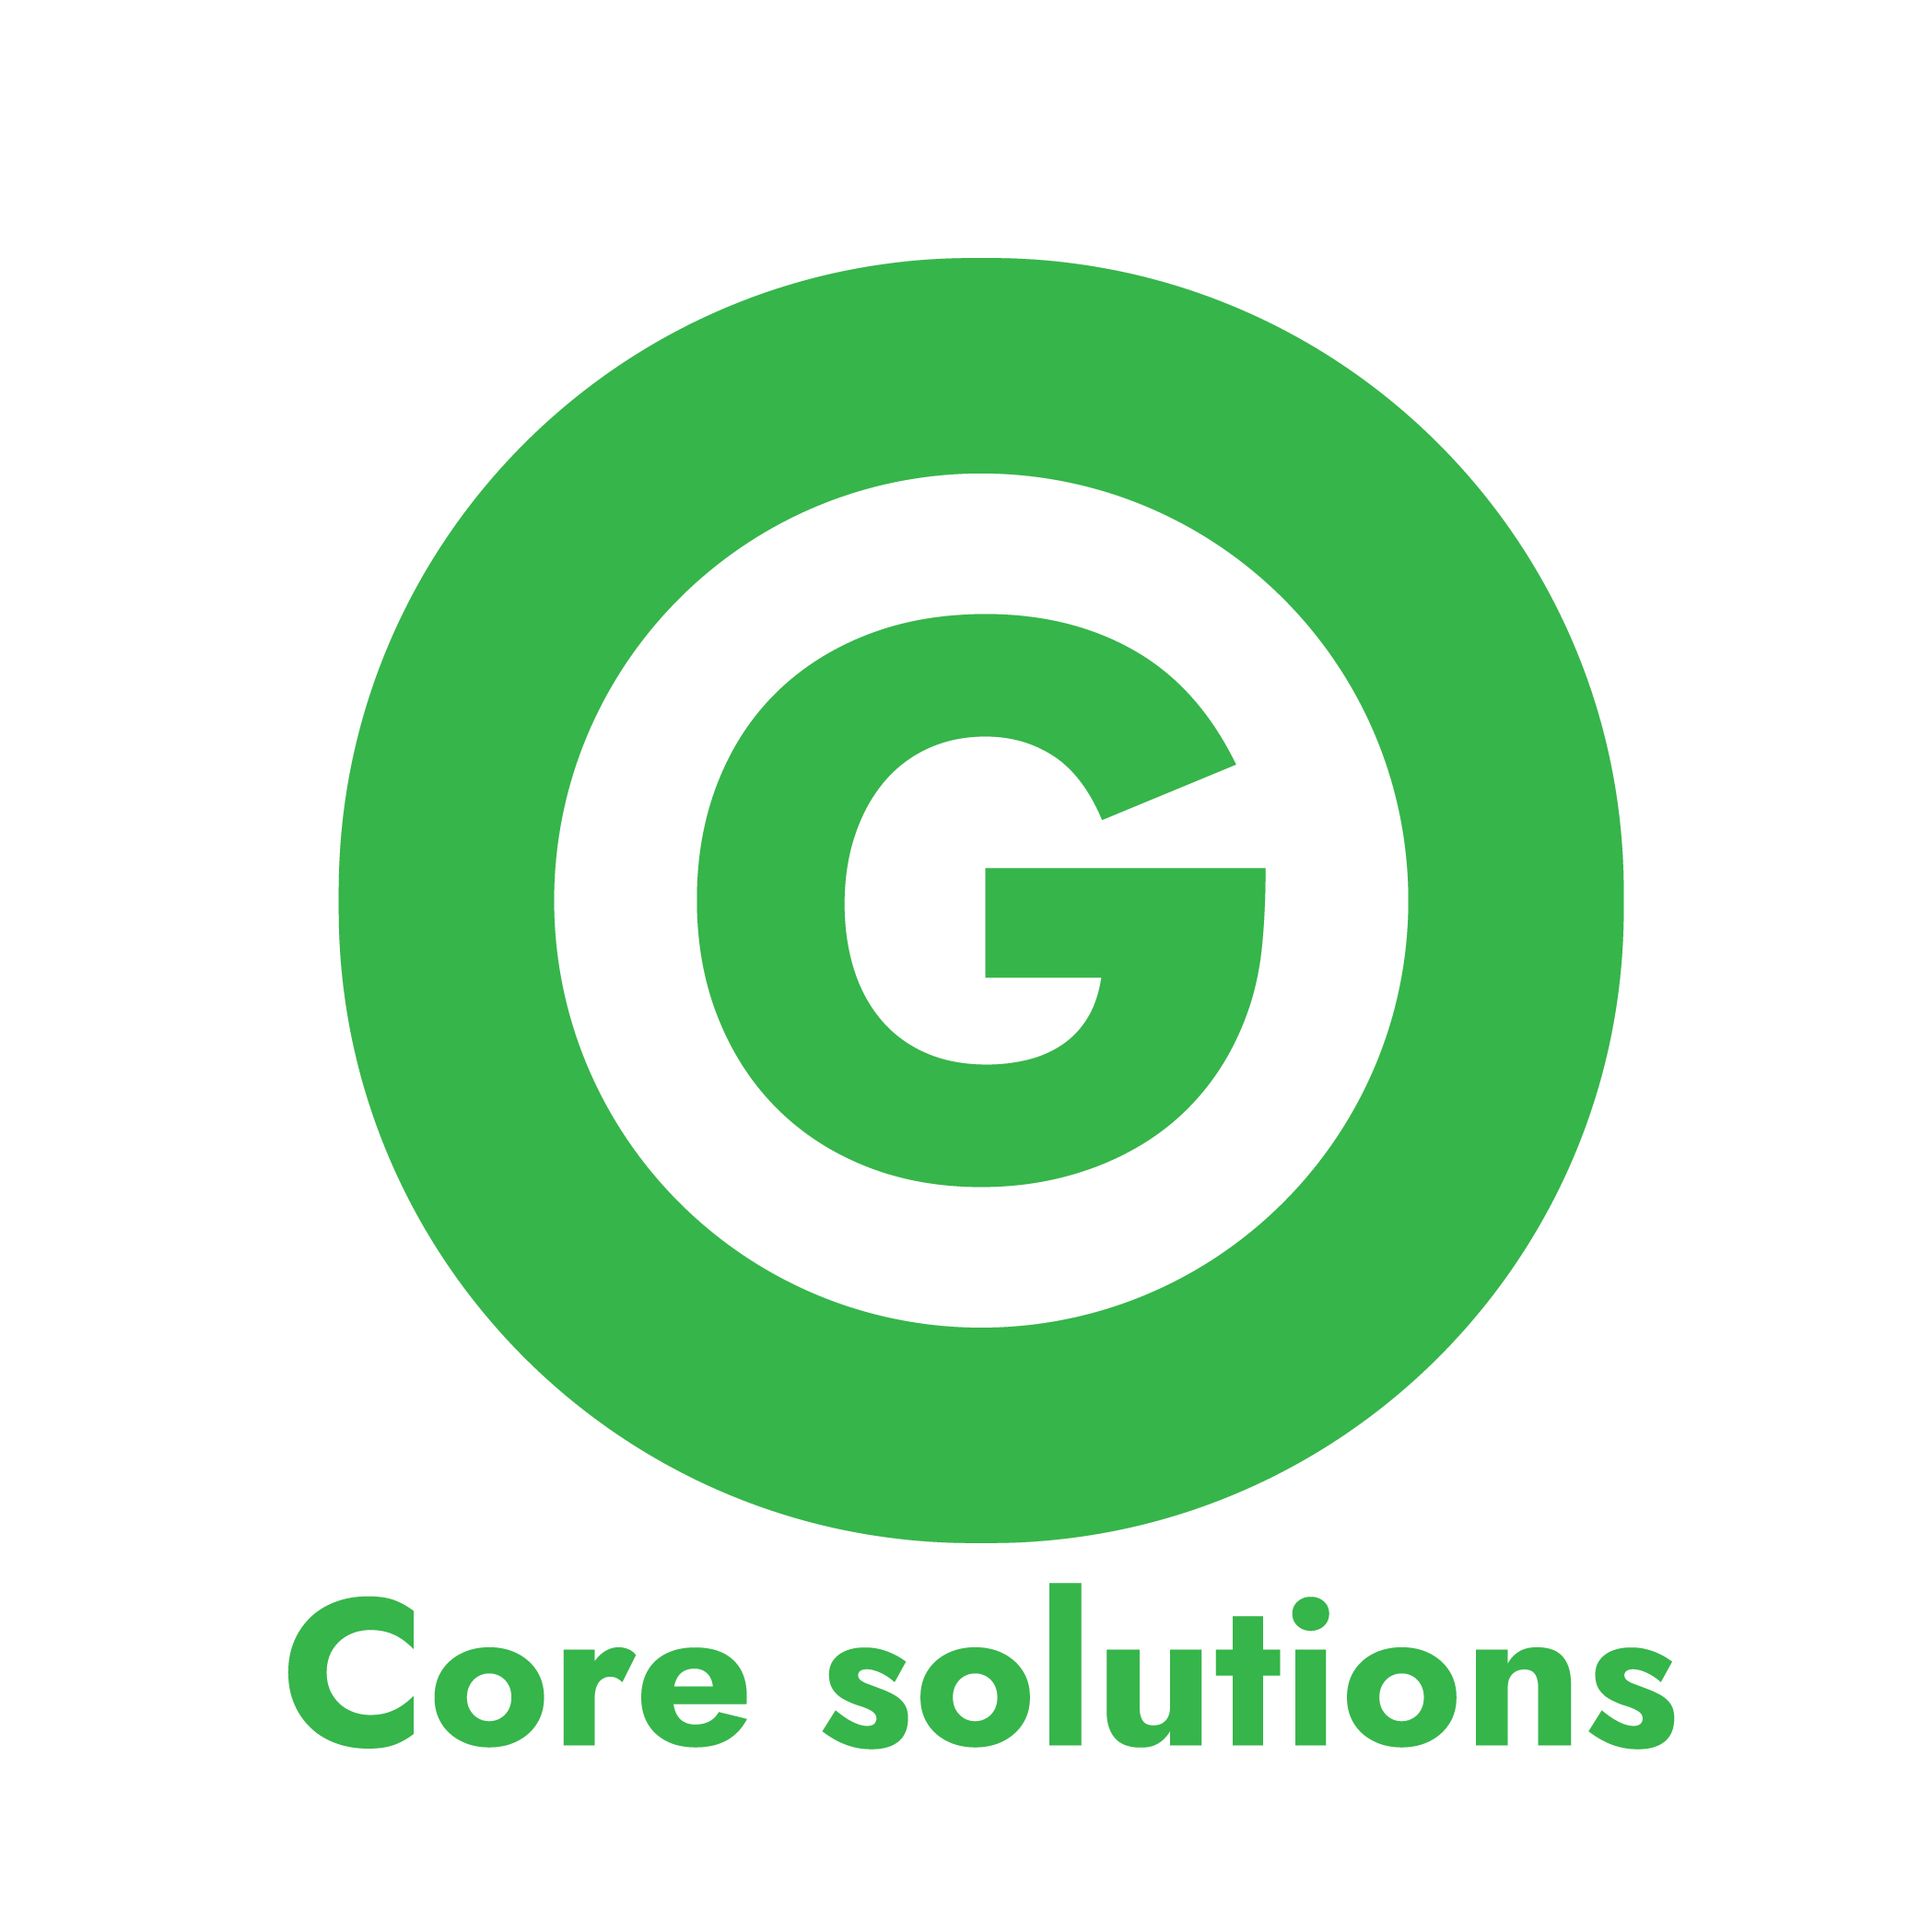 GLOBALG.A.P. Core solutions icon over full square white background